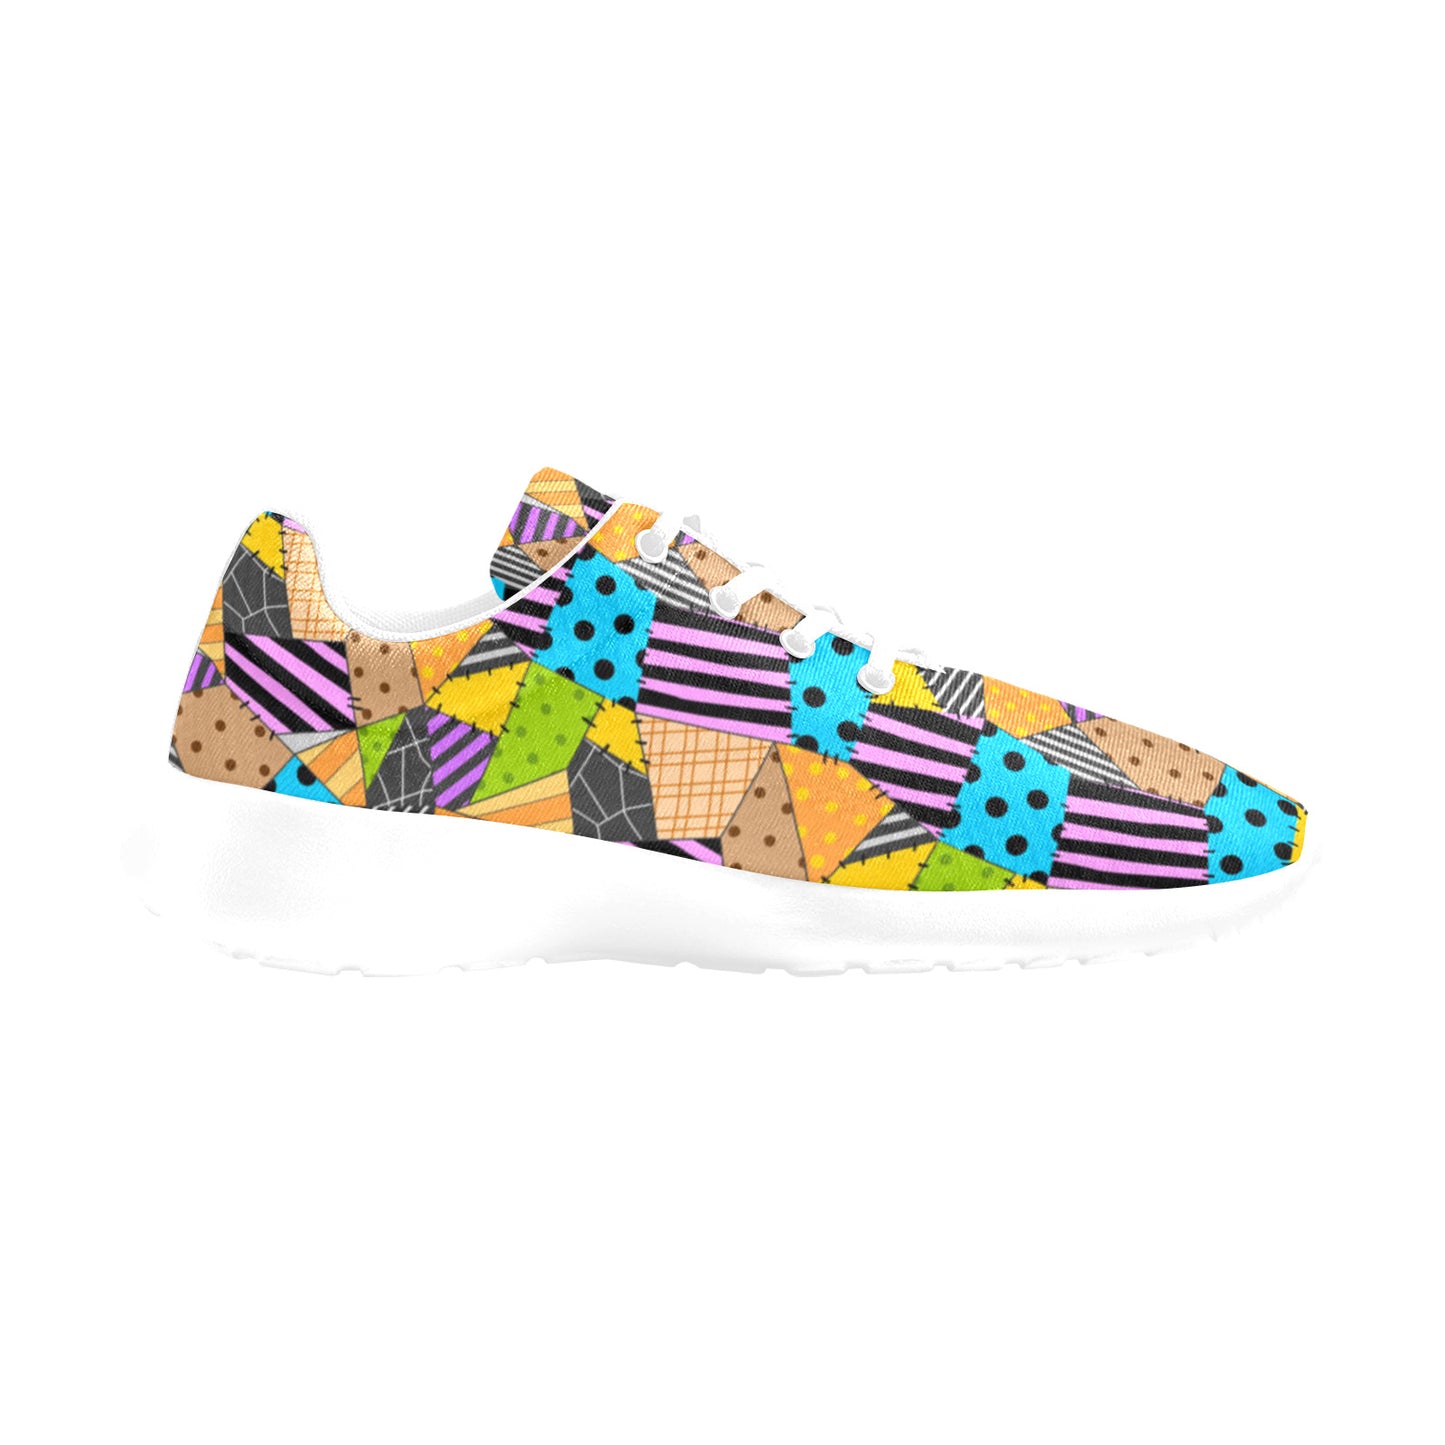 Colorful Rag Doll Women's Athletic Shoes